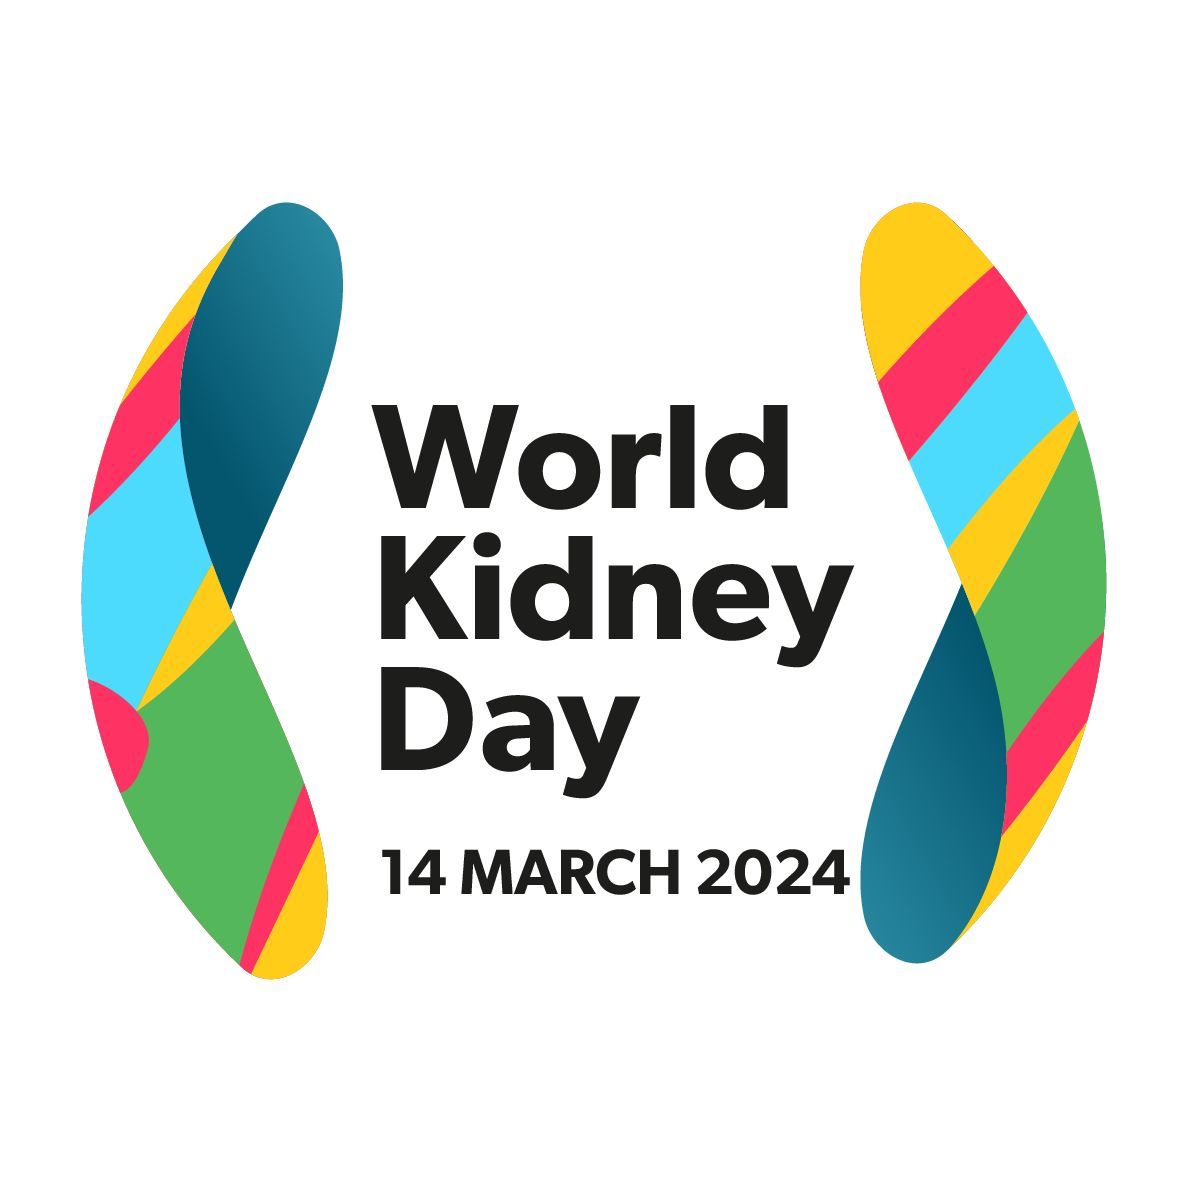 Don't forget to join us at the Village Hotel, Hull, anytime from 1-7pm today for our #WorldKidneyDay event! Speak to health experts, hear about different treatments for kidney disease and meet other staff who can help with issues such as healthy eating. All welcome #kidneysmatter